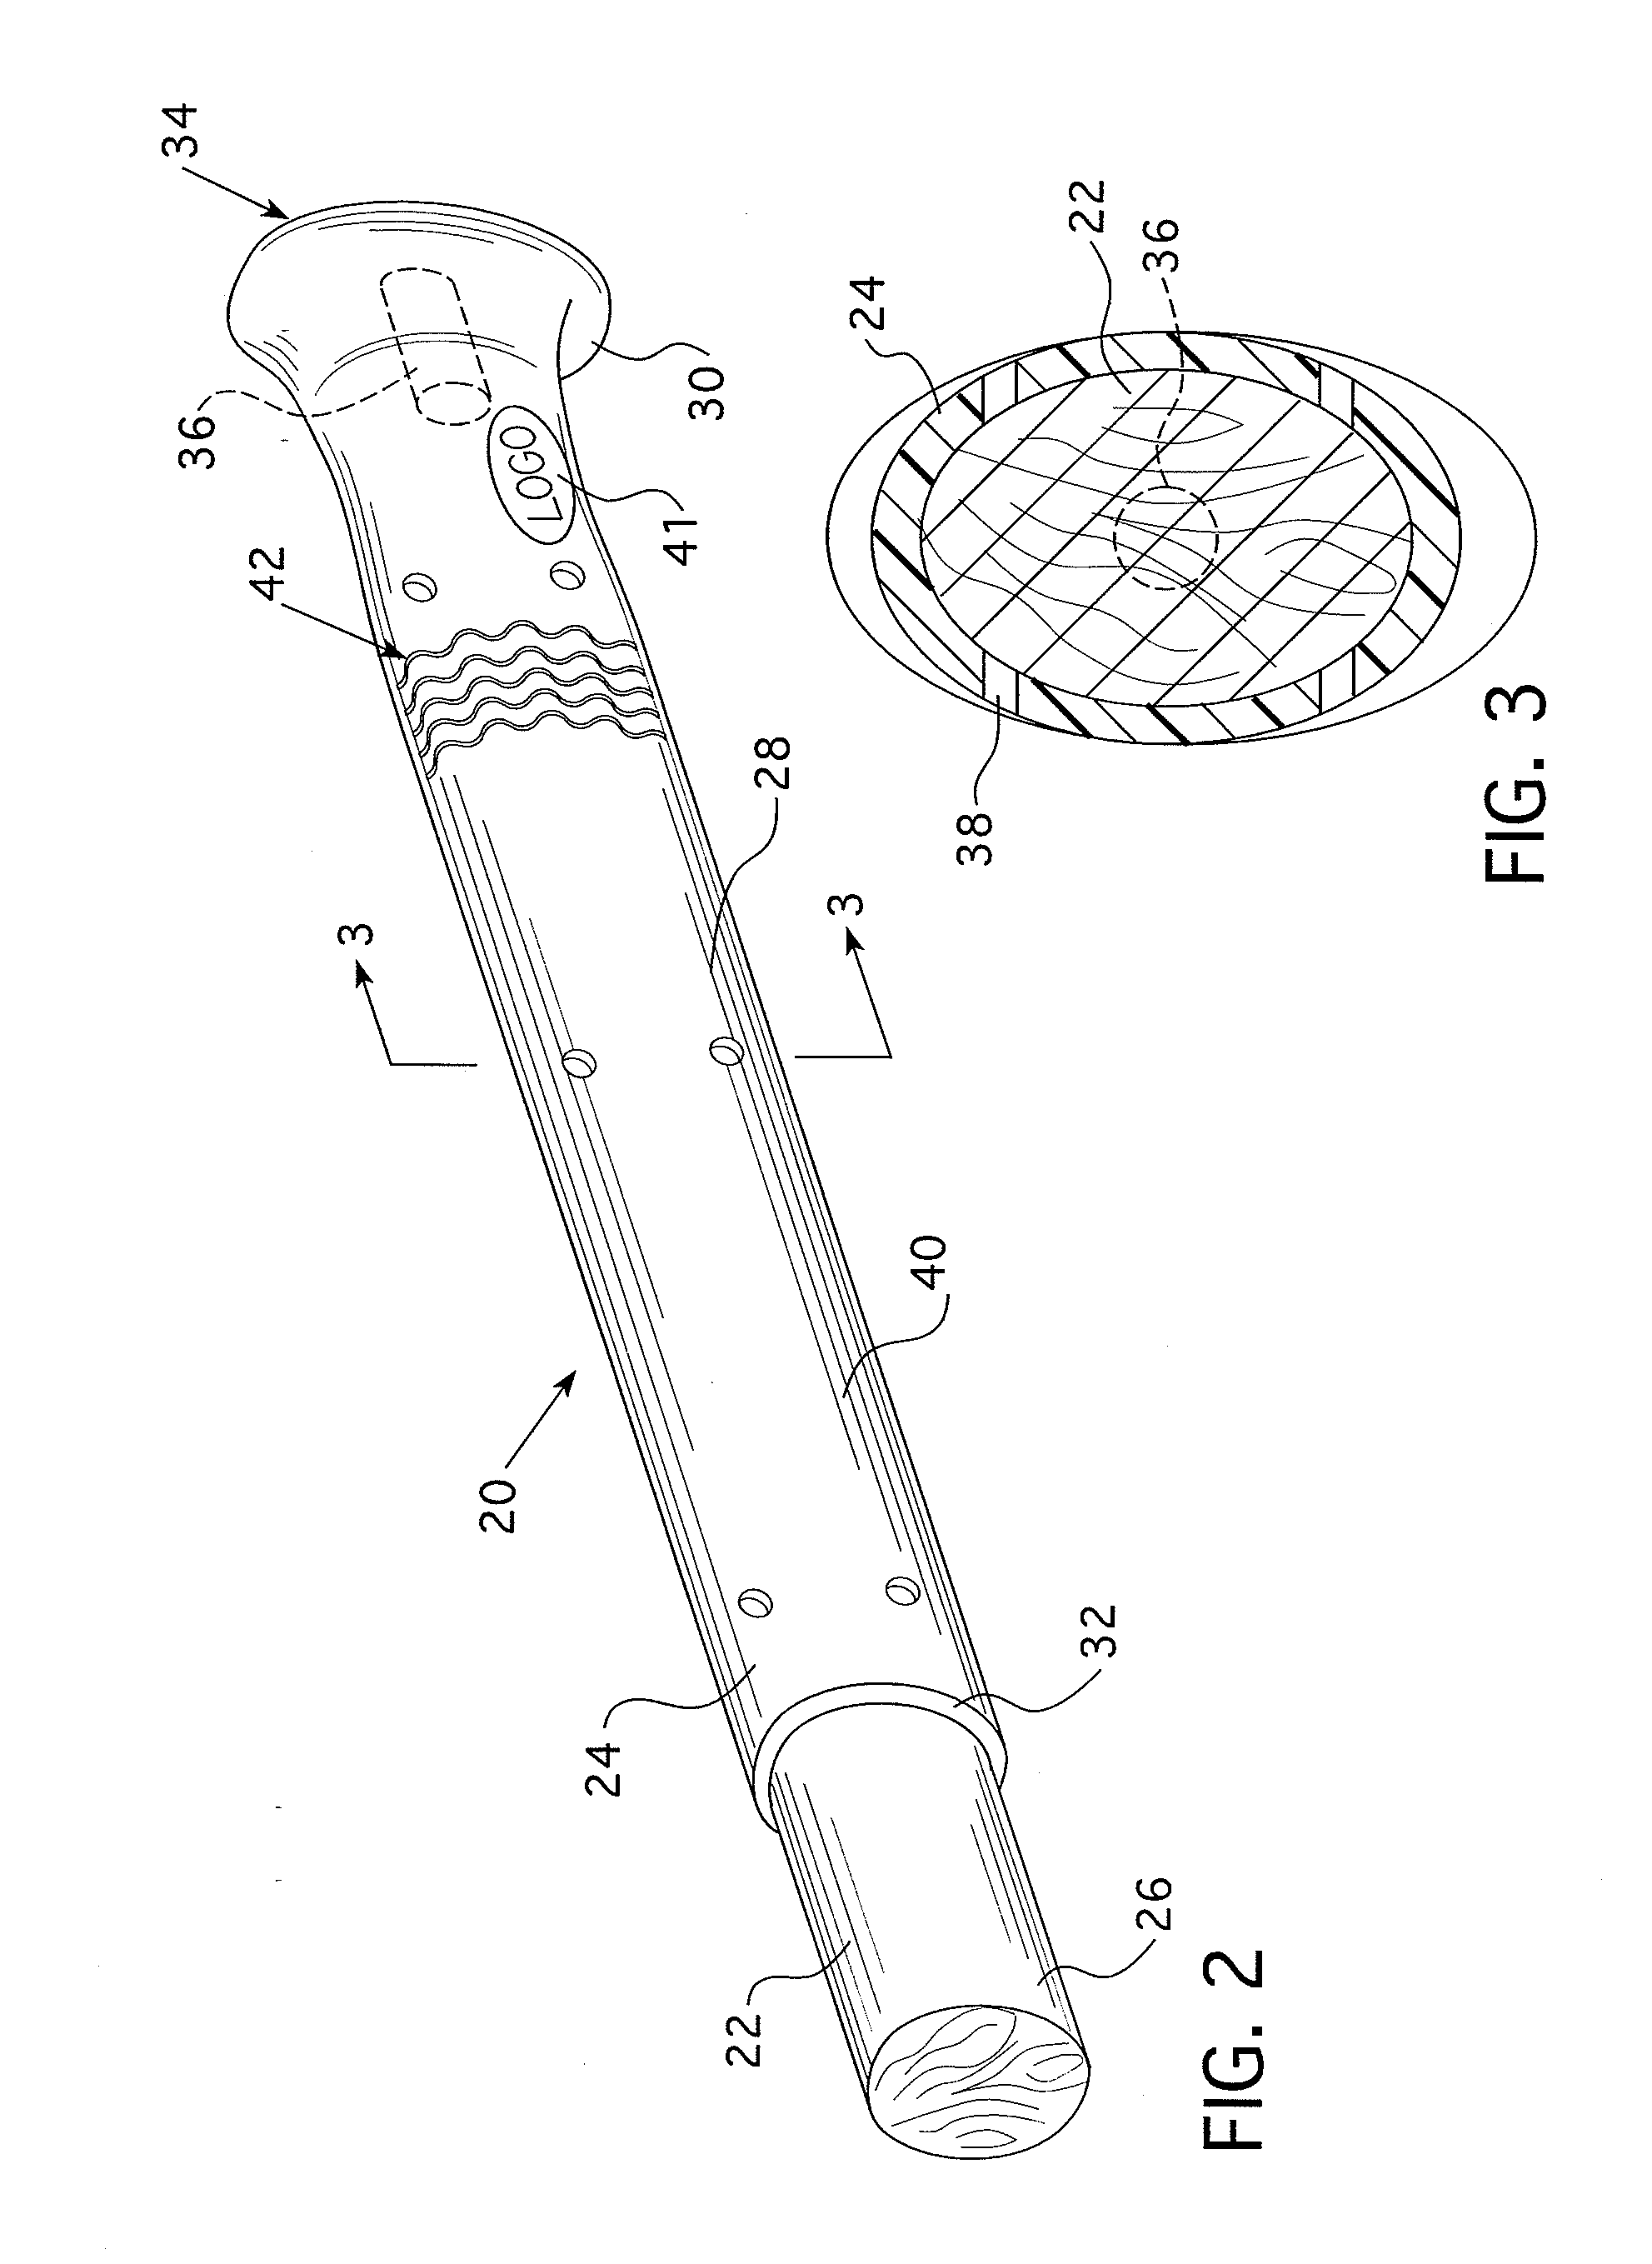 Wood handle with overmold and method of manufacture